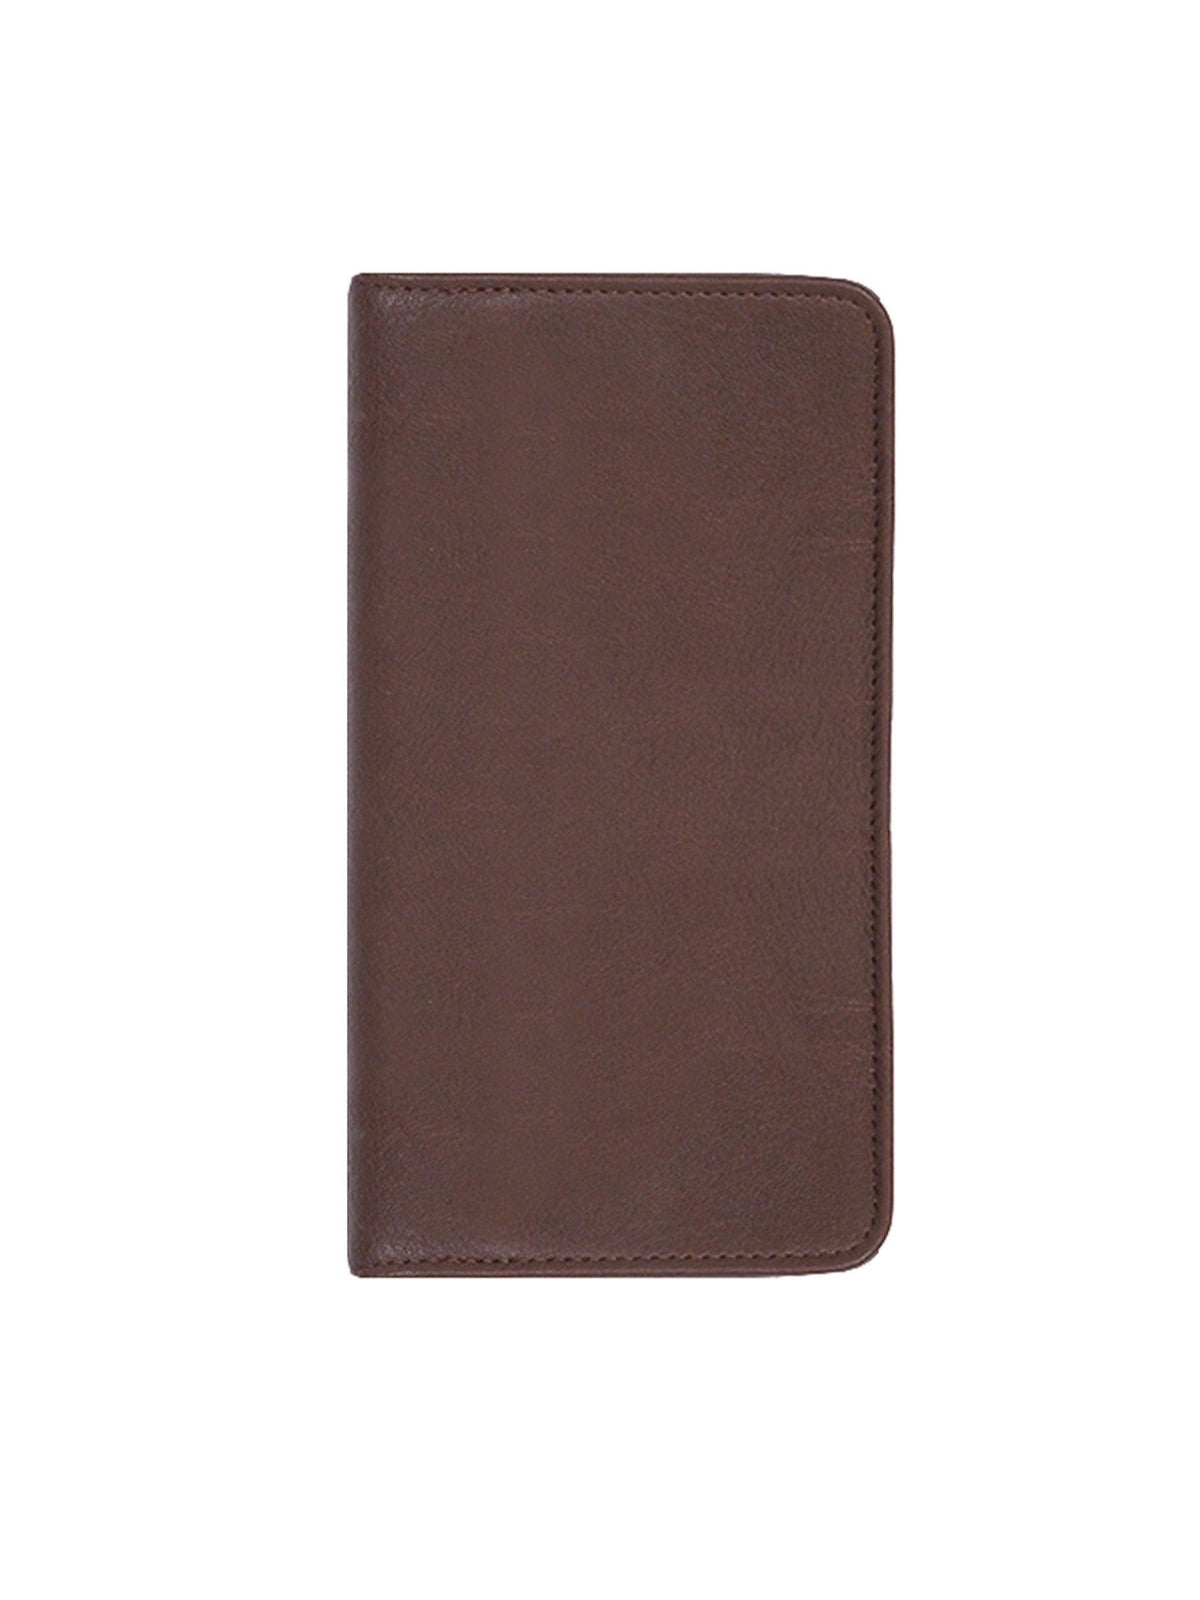 Scully Leather pocket weekly planner - Flyclothing LLC